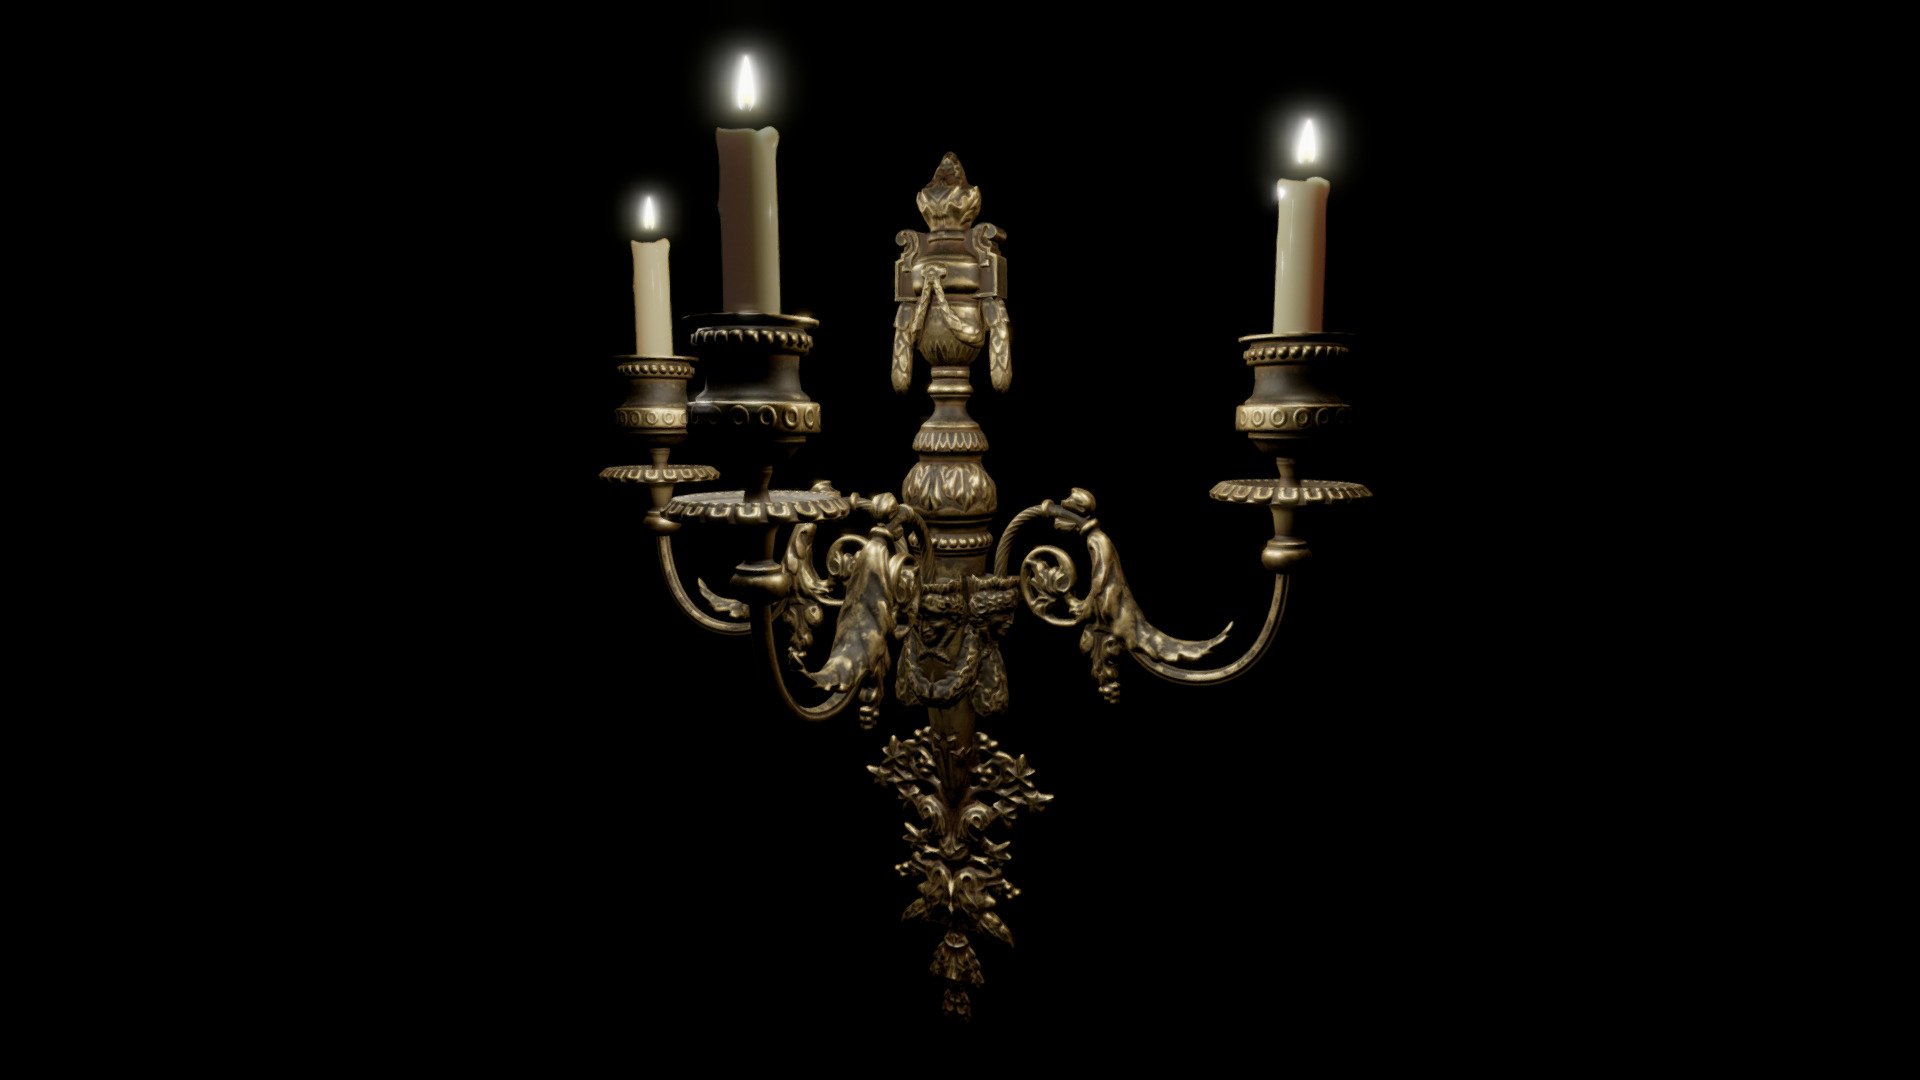 XIX Century French Empire Gilt Bronze Three-Light Sconce, Wall Candelabra, three-arm wall candleholder finely ornate with foliate, acorn motifs and three female faces, circa 1850-1870.
Modeled in Blender 3.4.0, Textured in Quixel Mixer 2022.1.1 3d model